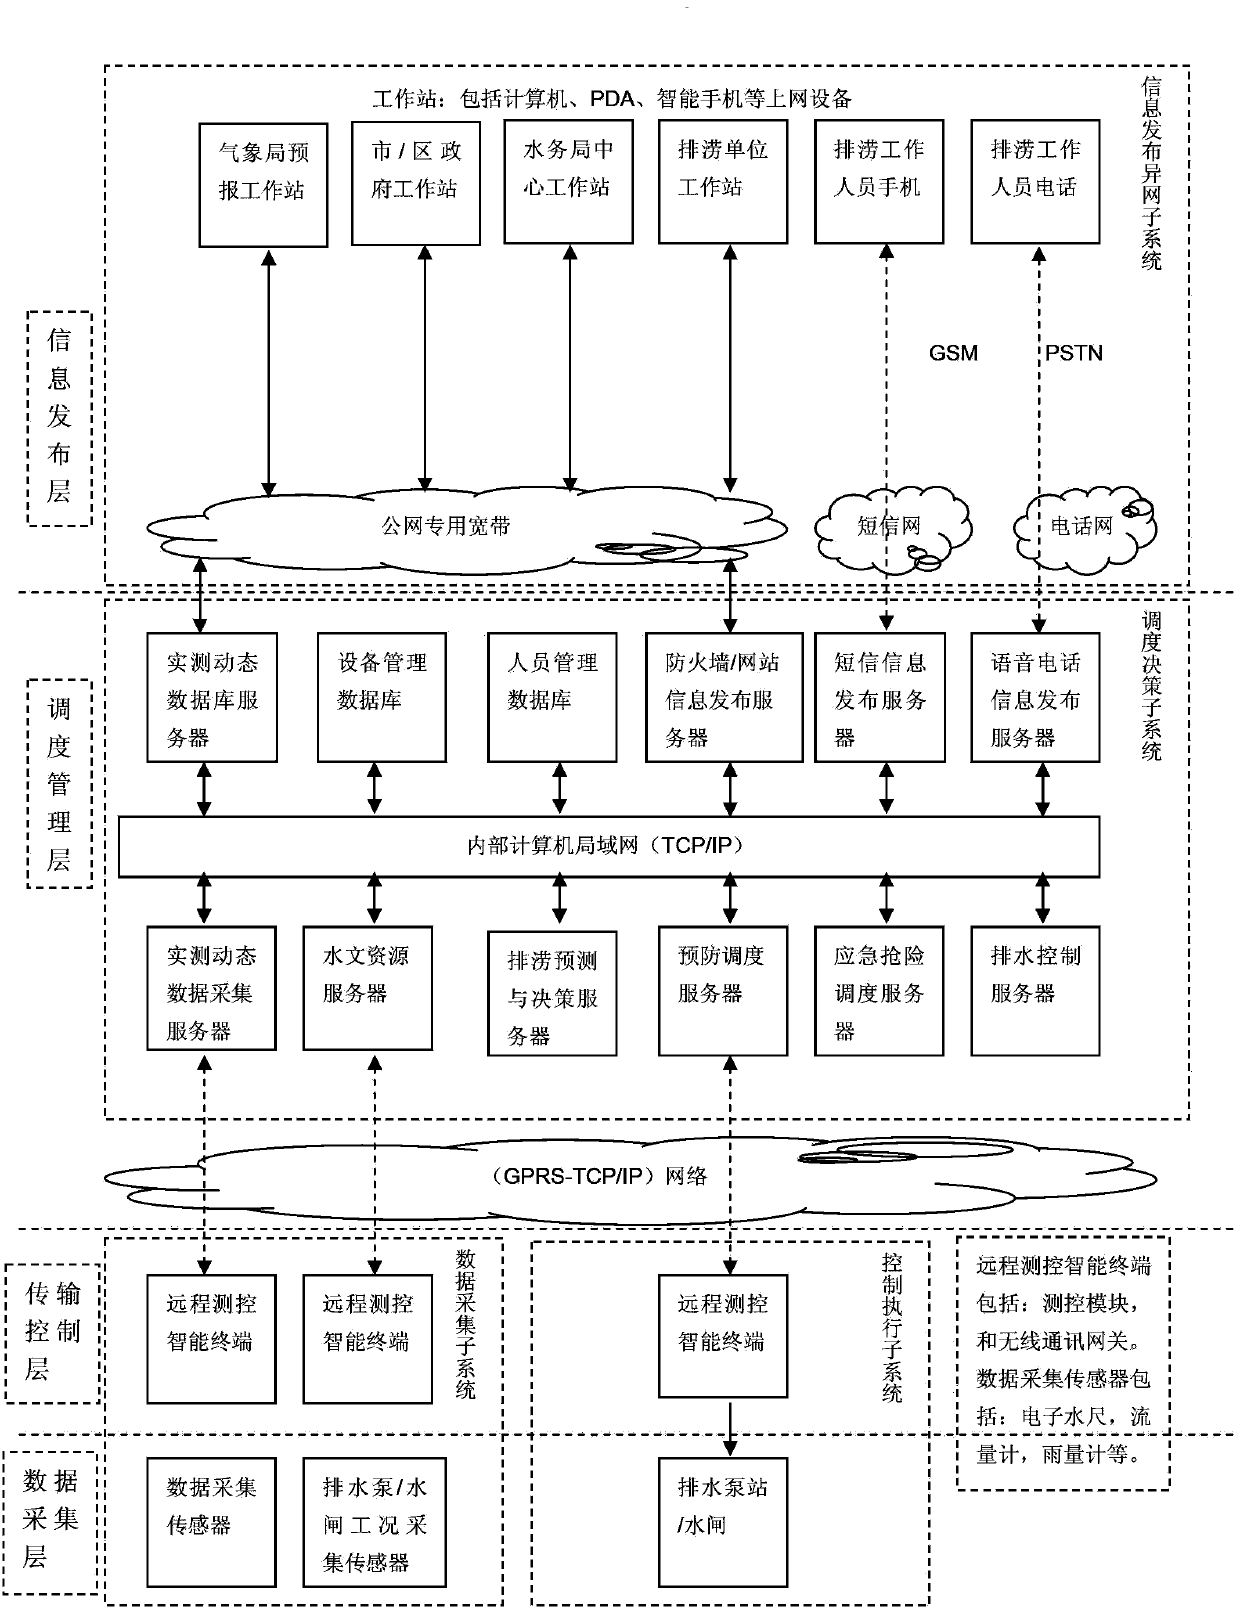 Heterogeneous network communication-based urban inland inundation monitoring and information service system and monitoring method